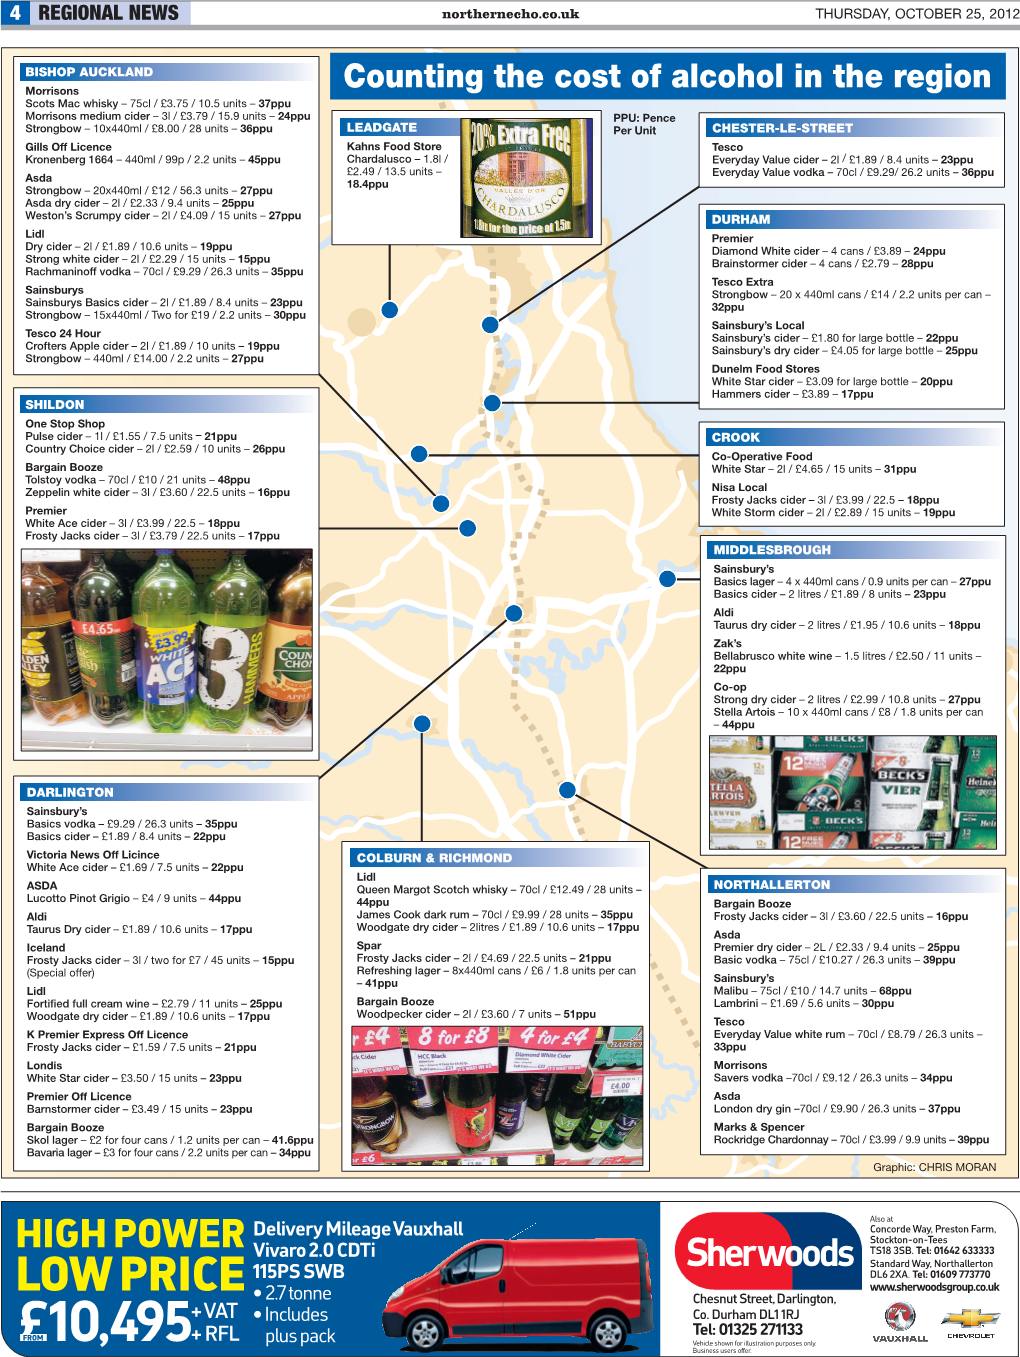 Counting the Cost of Alcohol in the Region